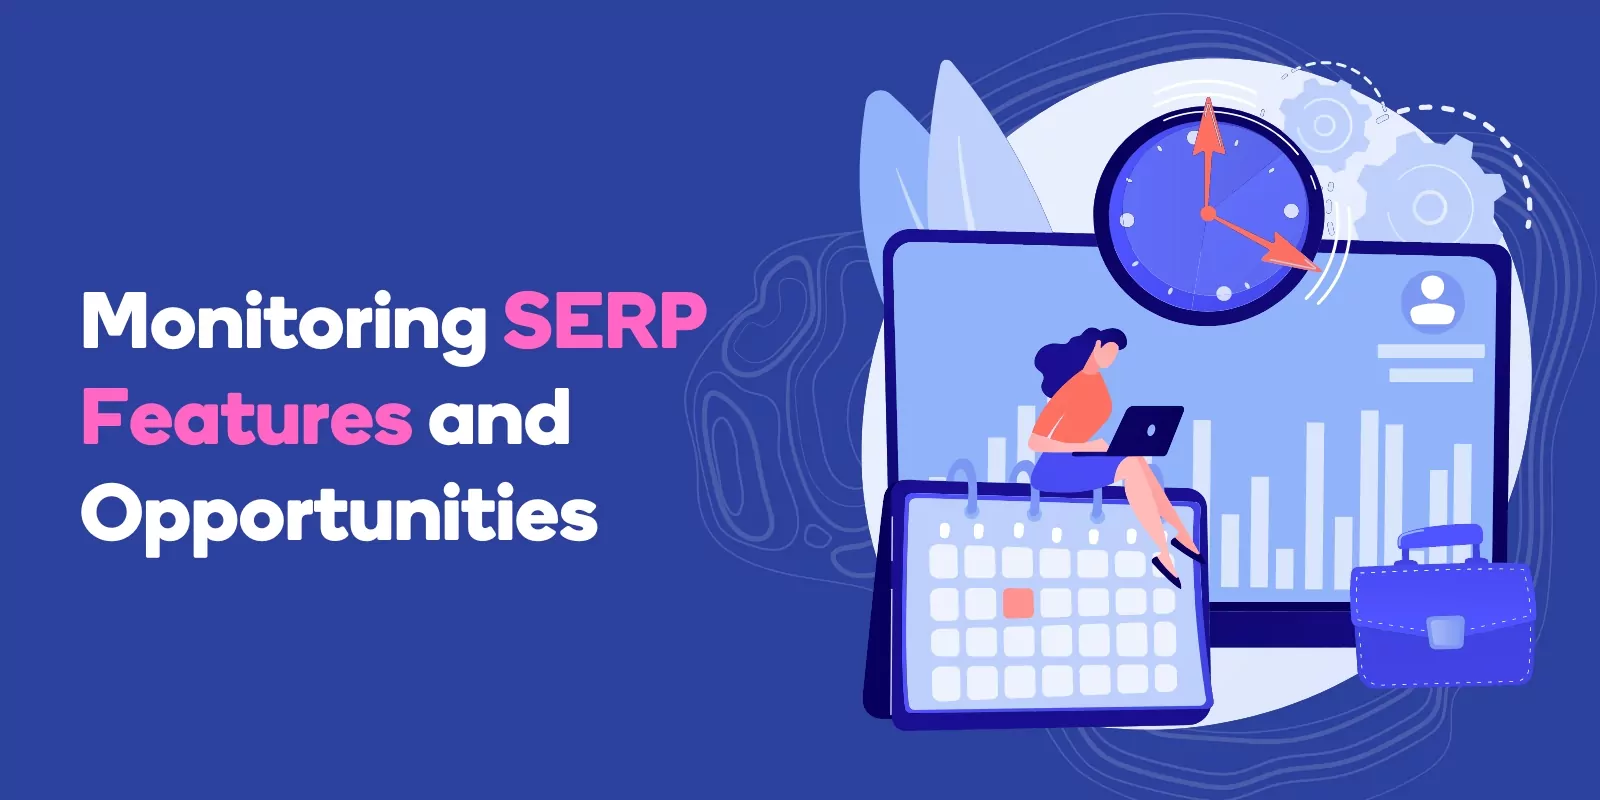 Monitoring SERP Features and Opportunities